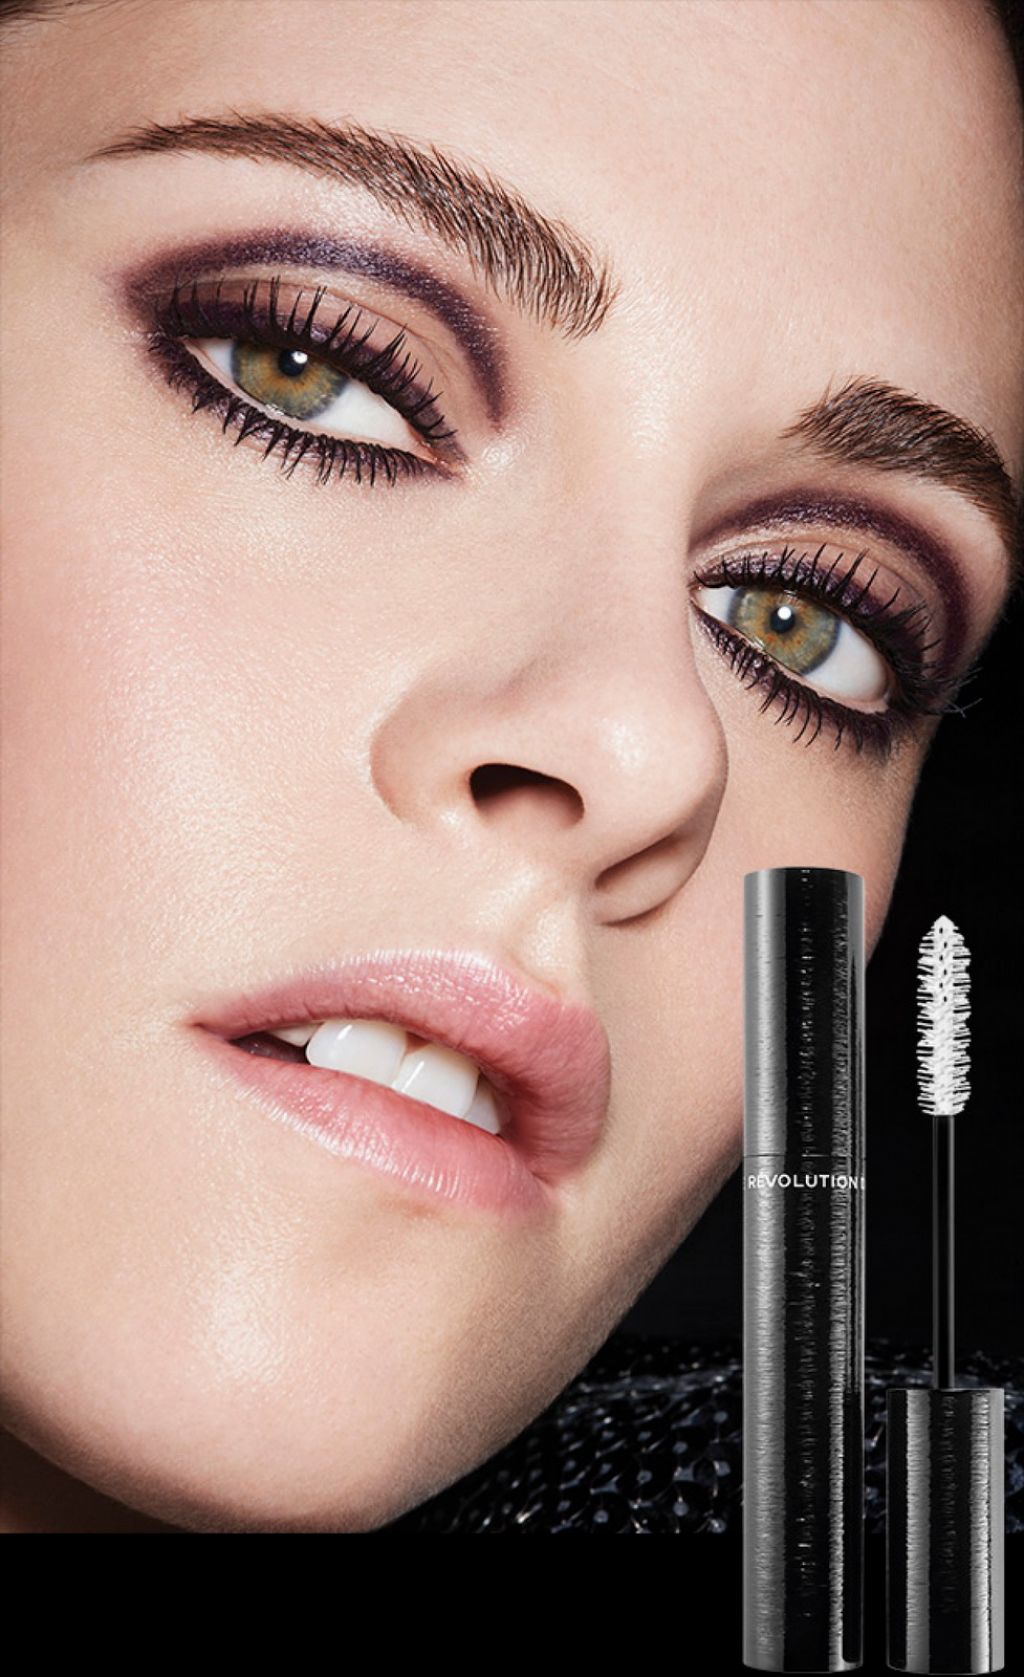 Kristen Stewart Is The New Face Of Chanel Makeup